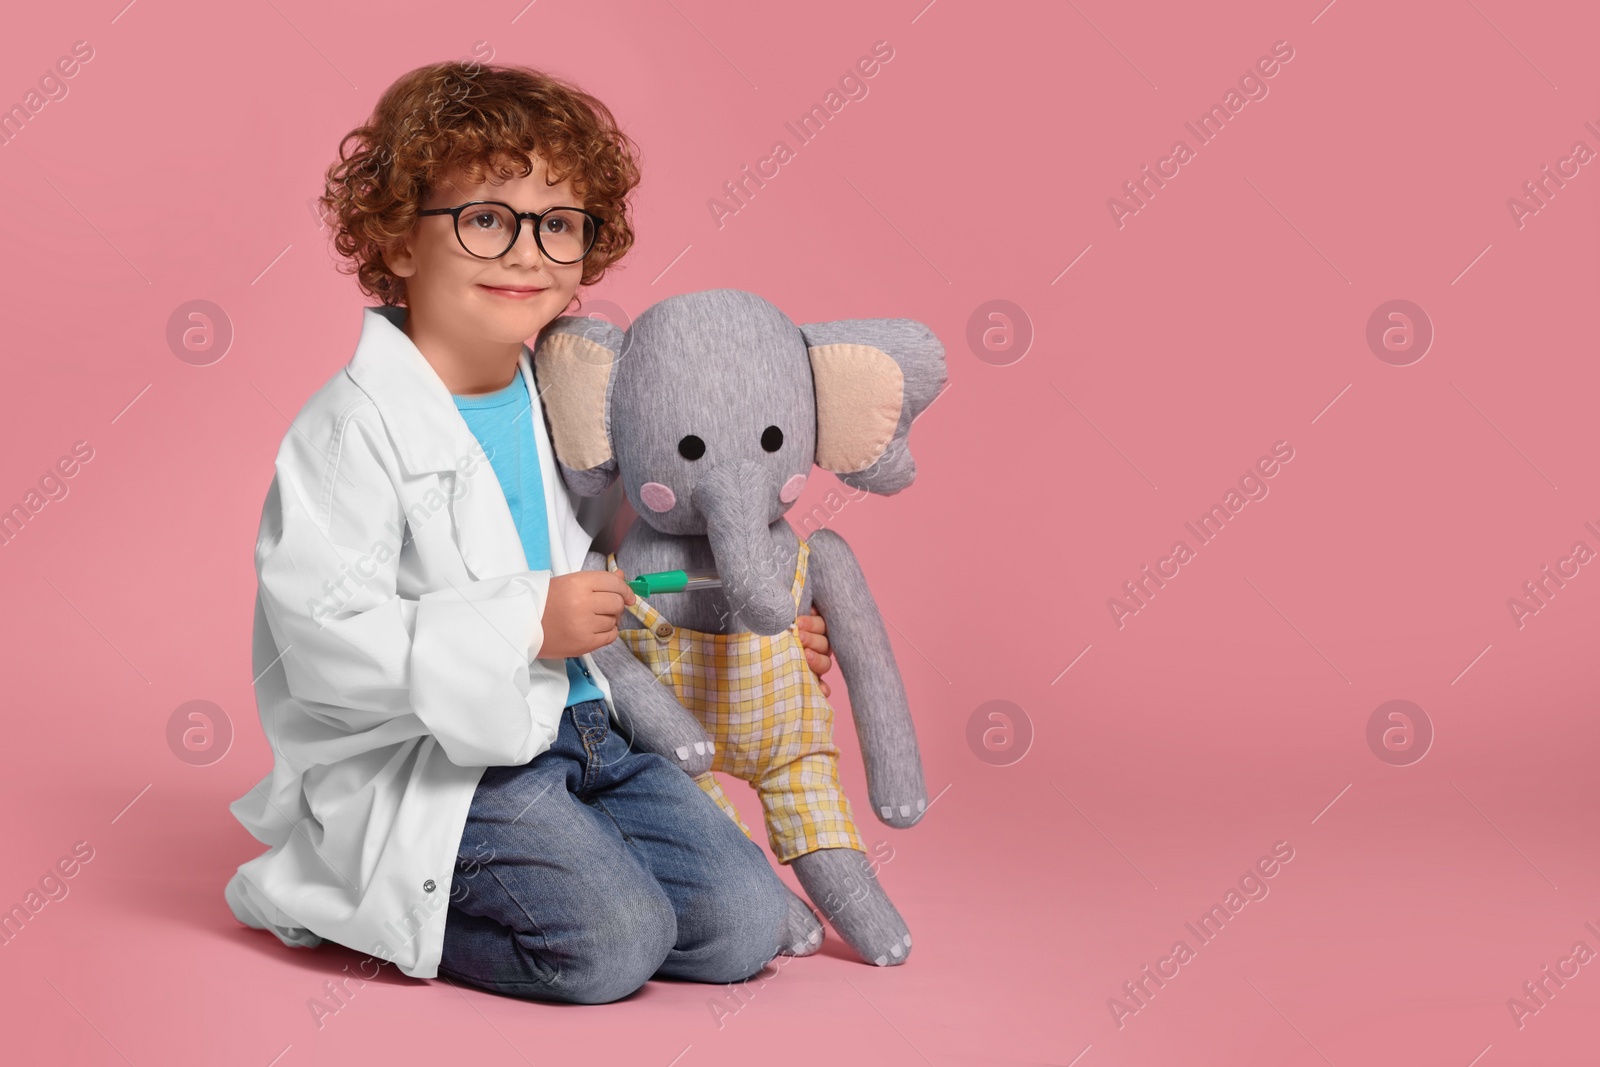 Photo of Little boy in medical uniform with thermometer and toy elephant on pink background. Space for text